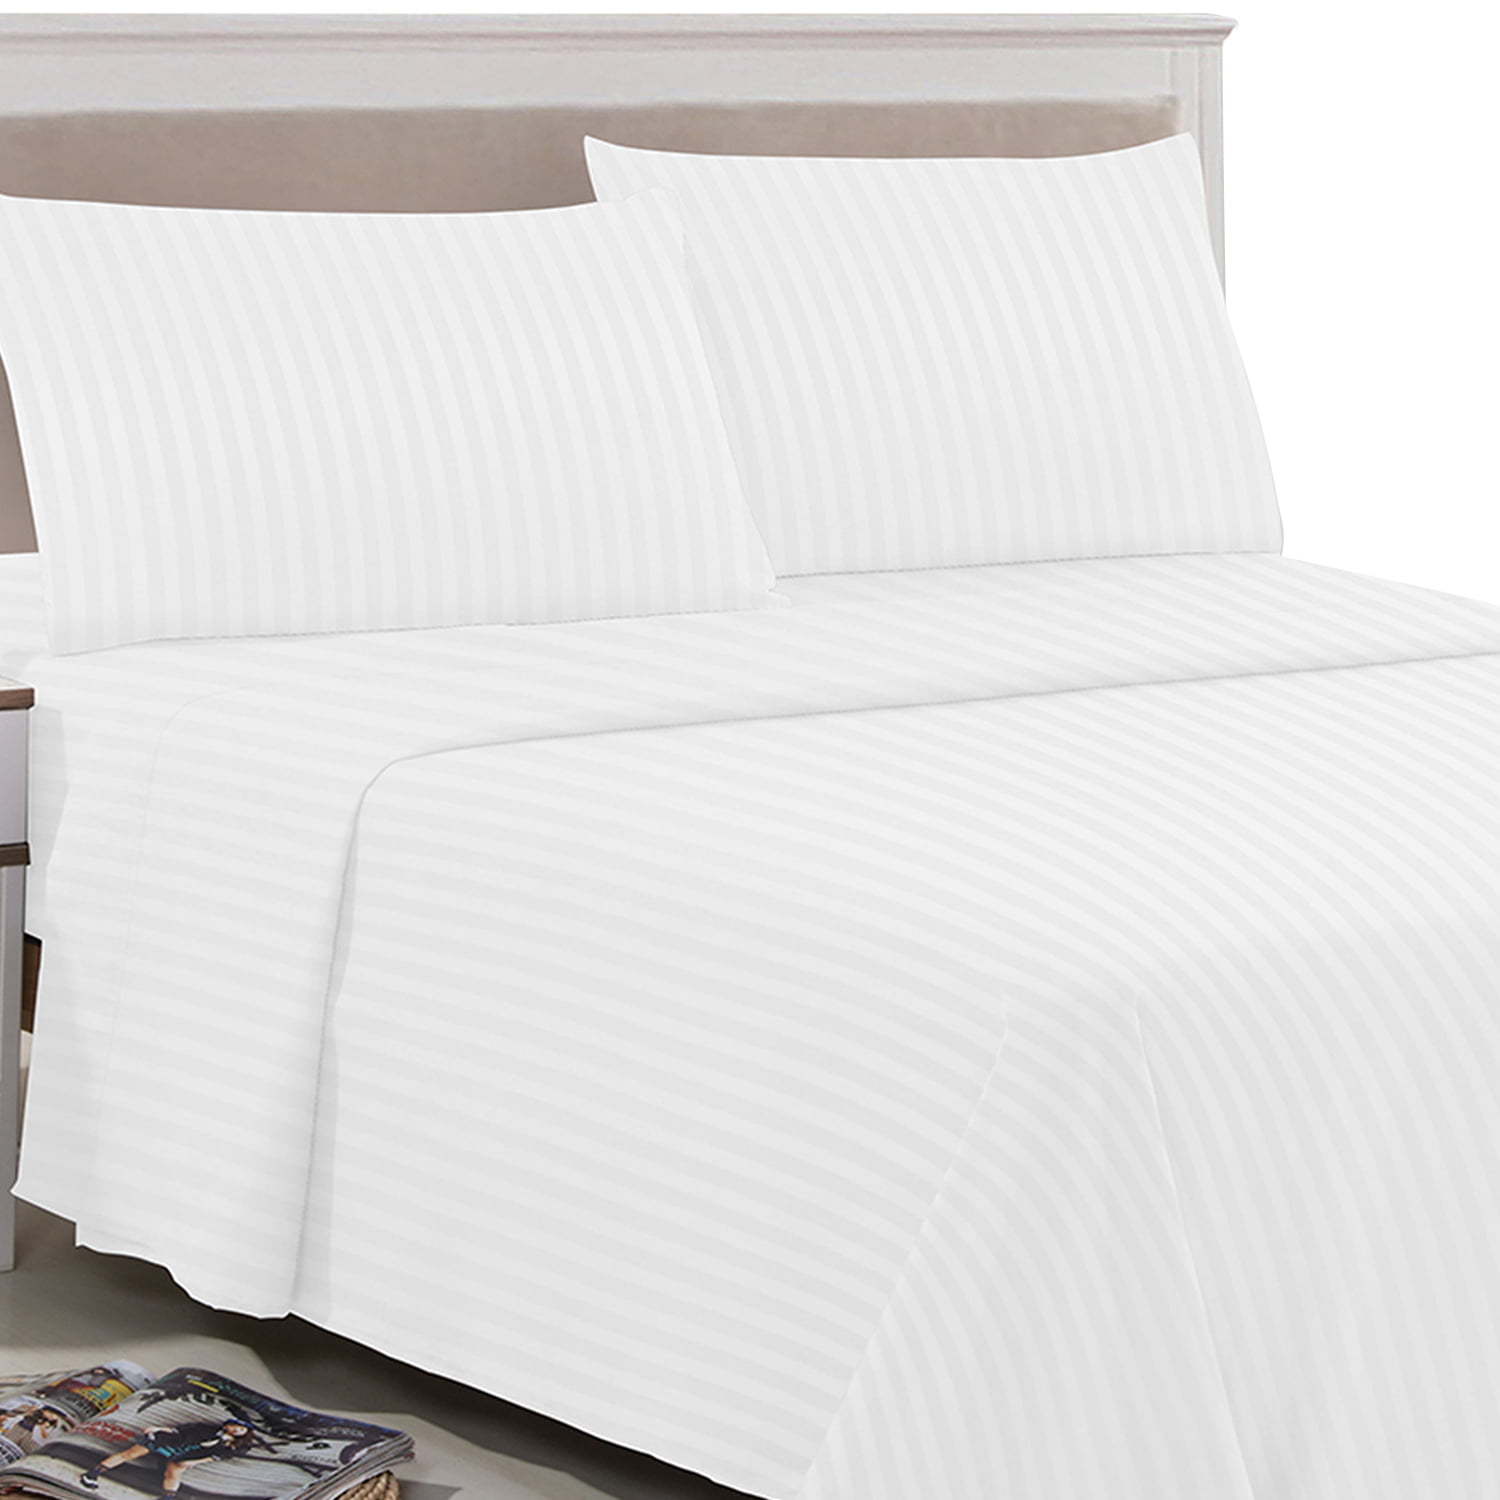 Details about   Clara Clark Premier 1800 Collection Bed Sheet Set with Extra Pillowcases Wrinkle 